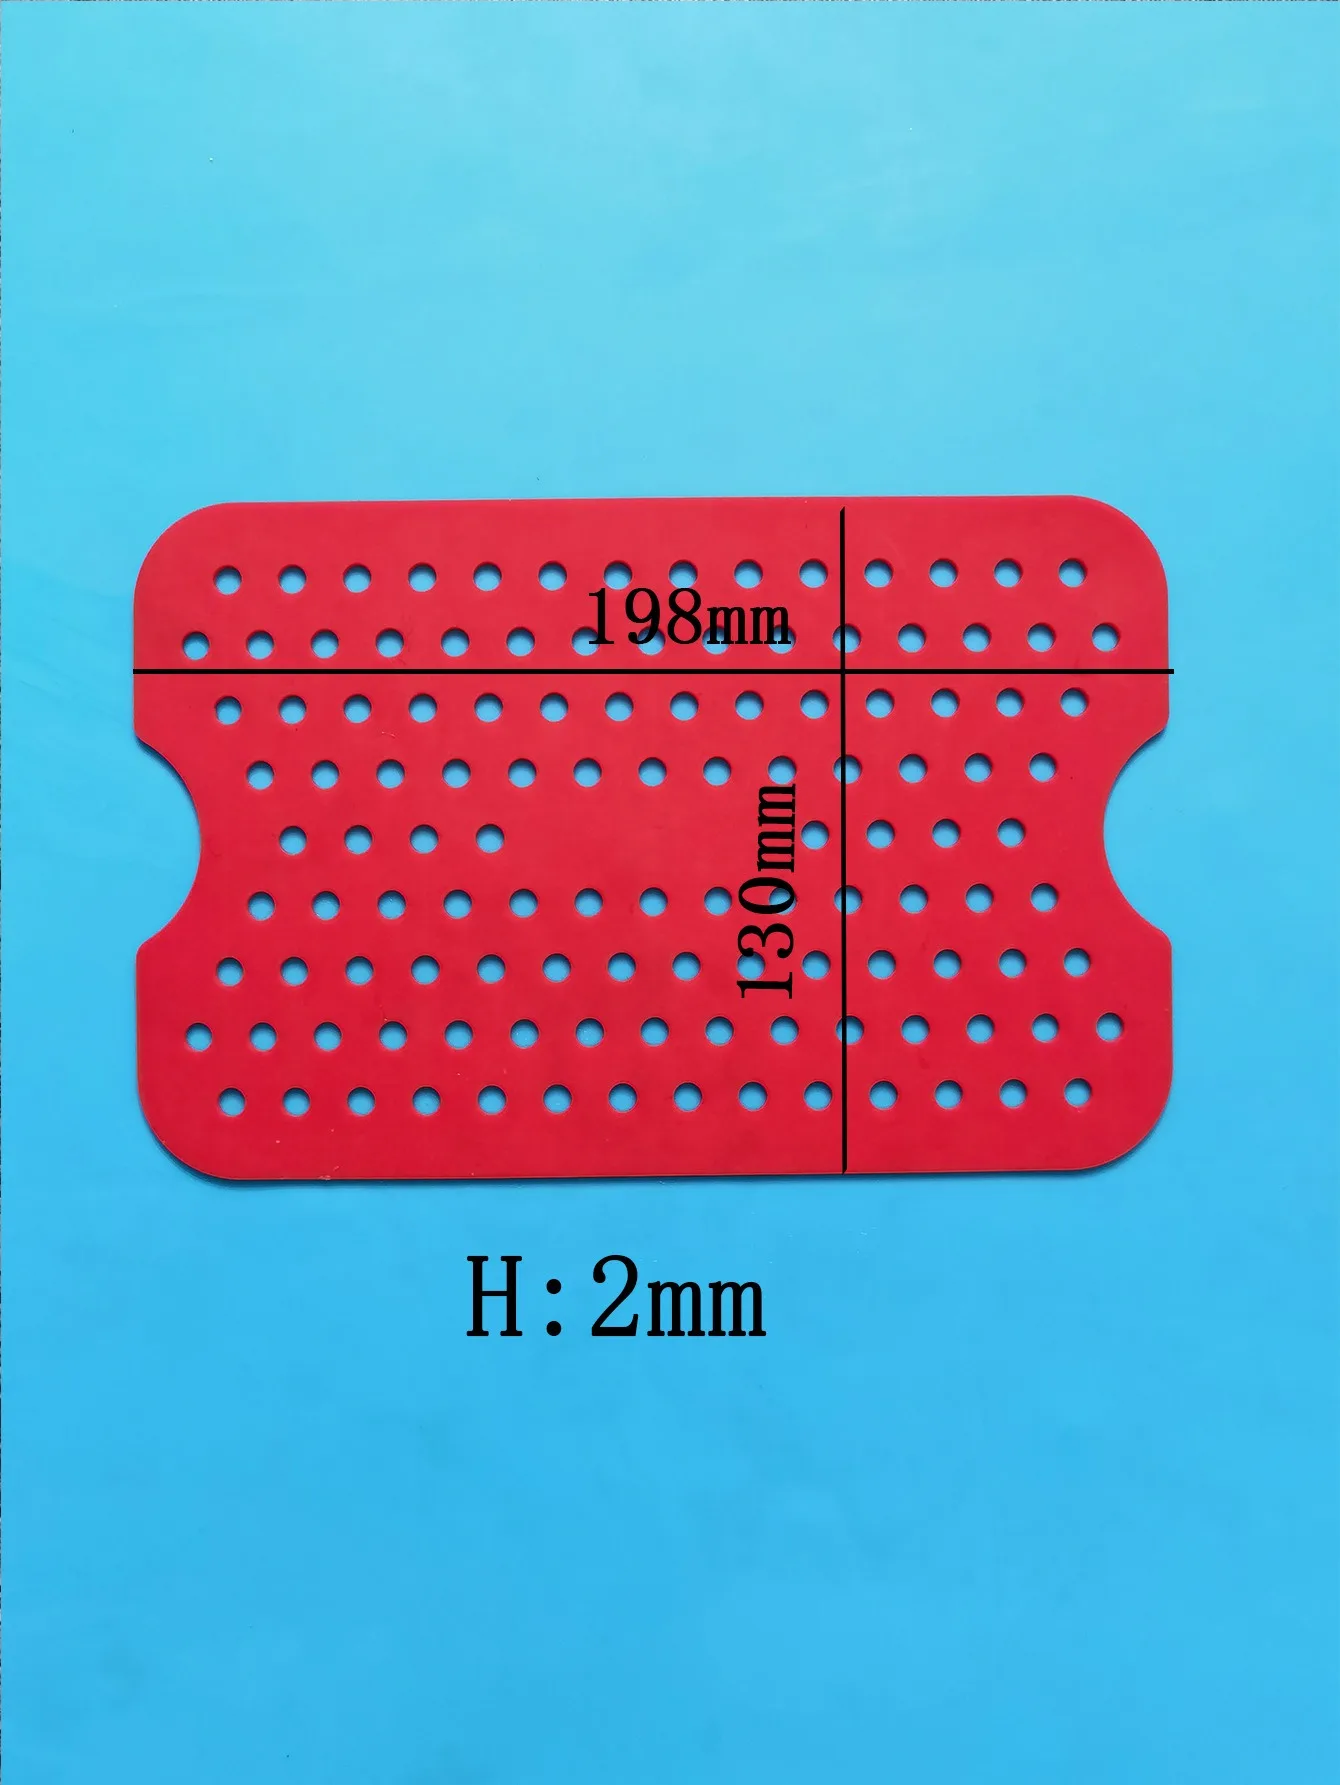 High Quality Non Slip Pad Air Fryer Basket Oven Utensils Mat Kitchen Accessories silicone pans silicone airfryer basket